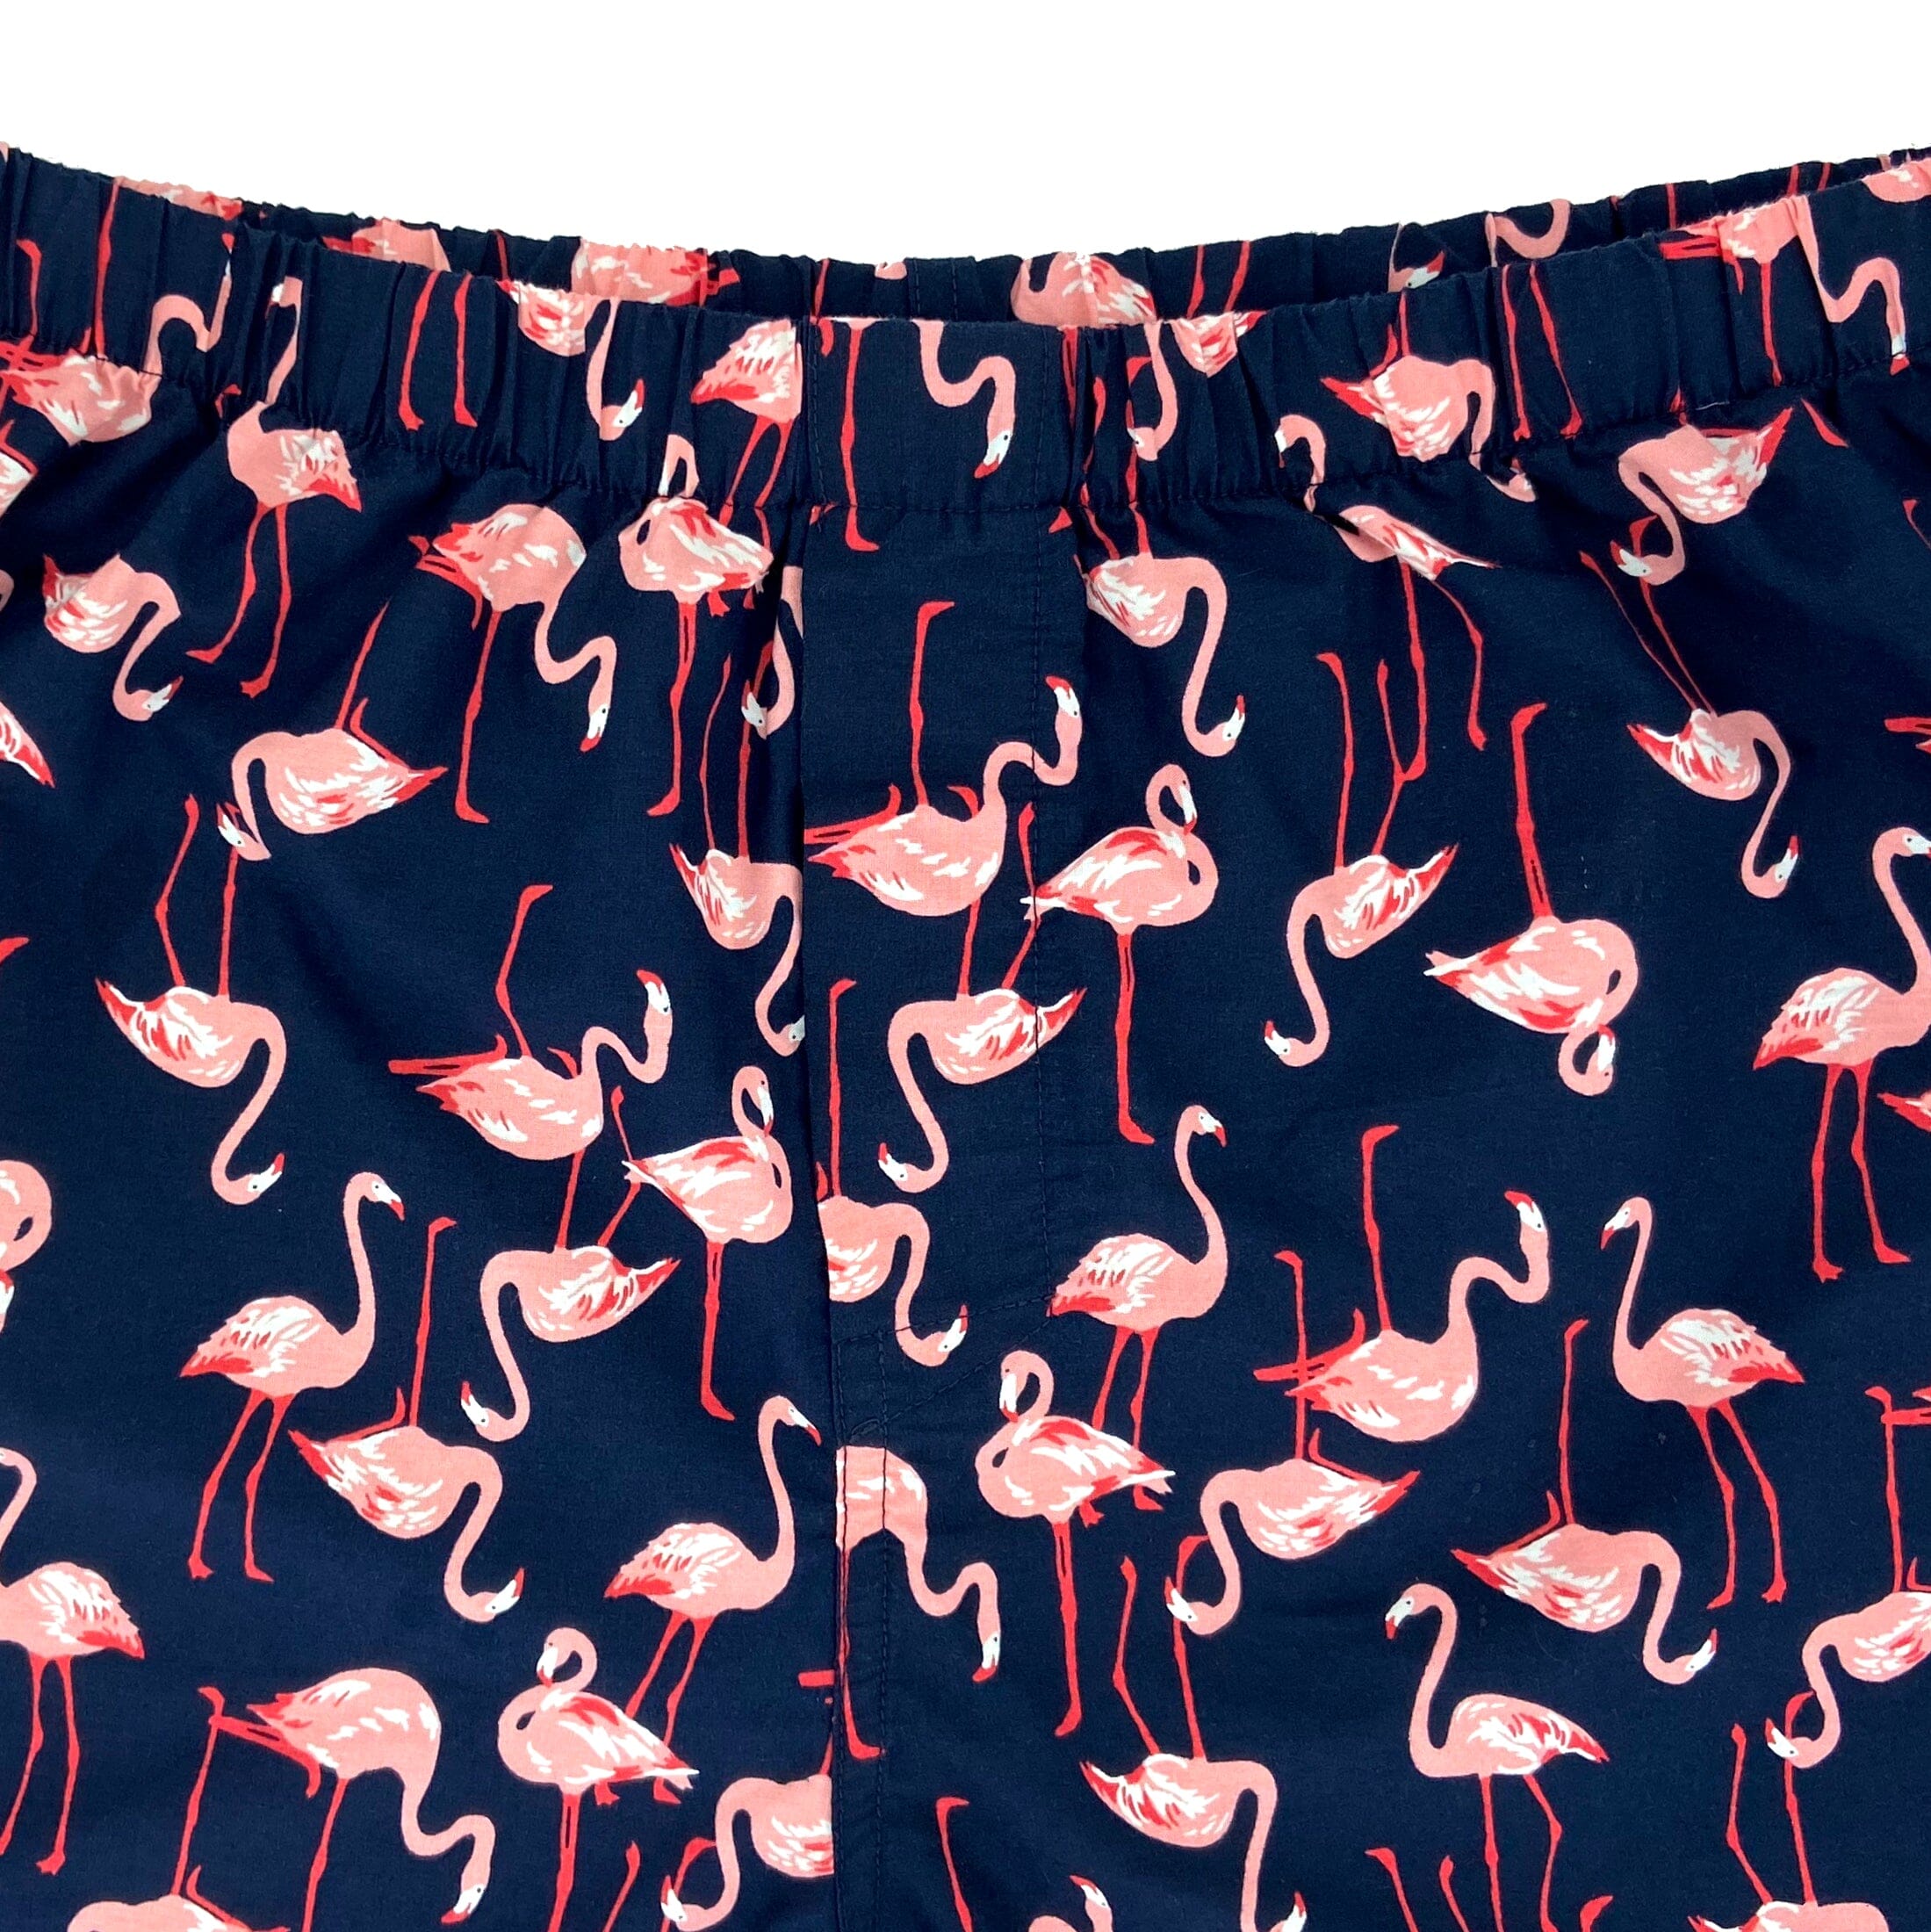 Classic Dark Blue Boxer Shorts with Bright Pink Flamingoes All Over